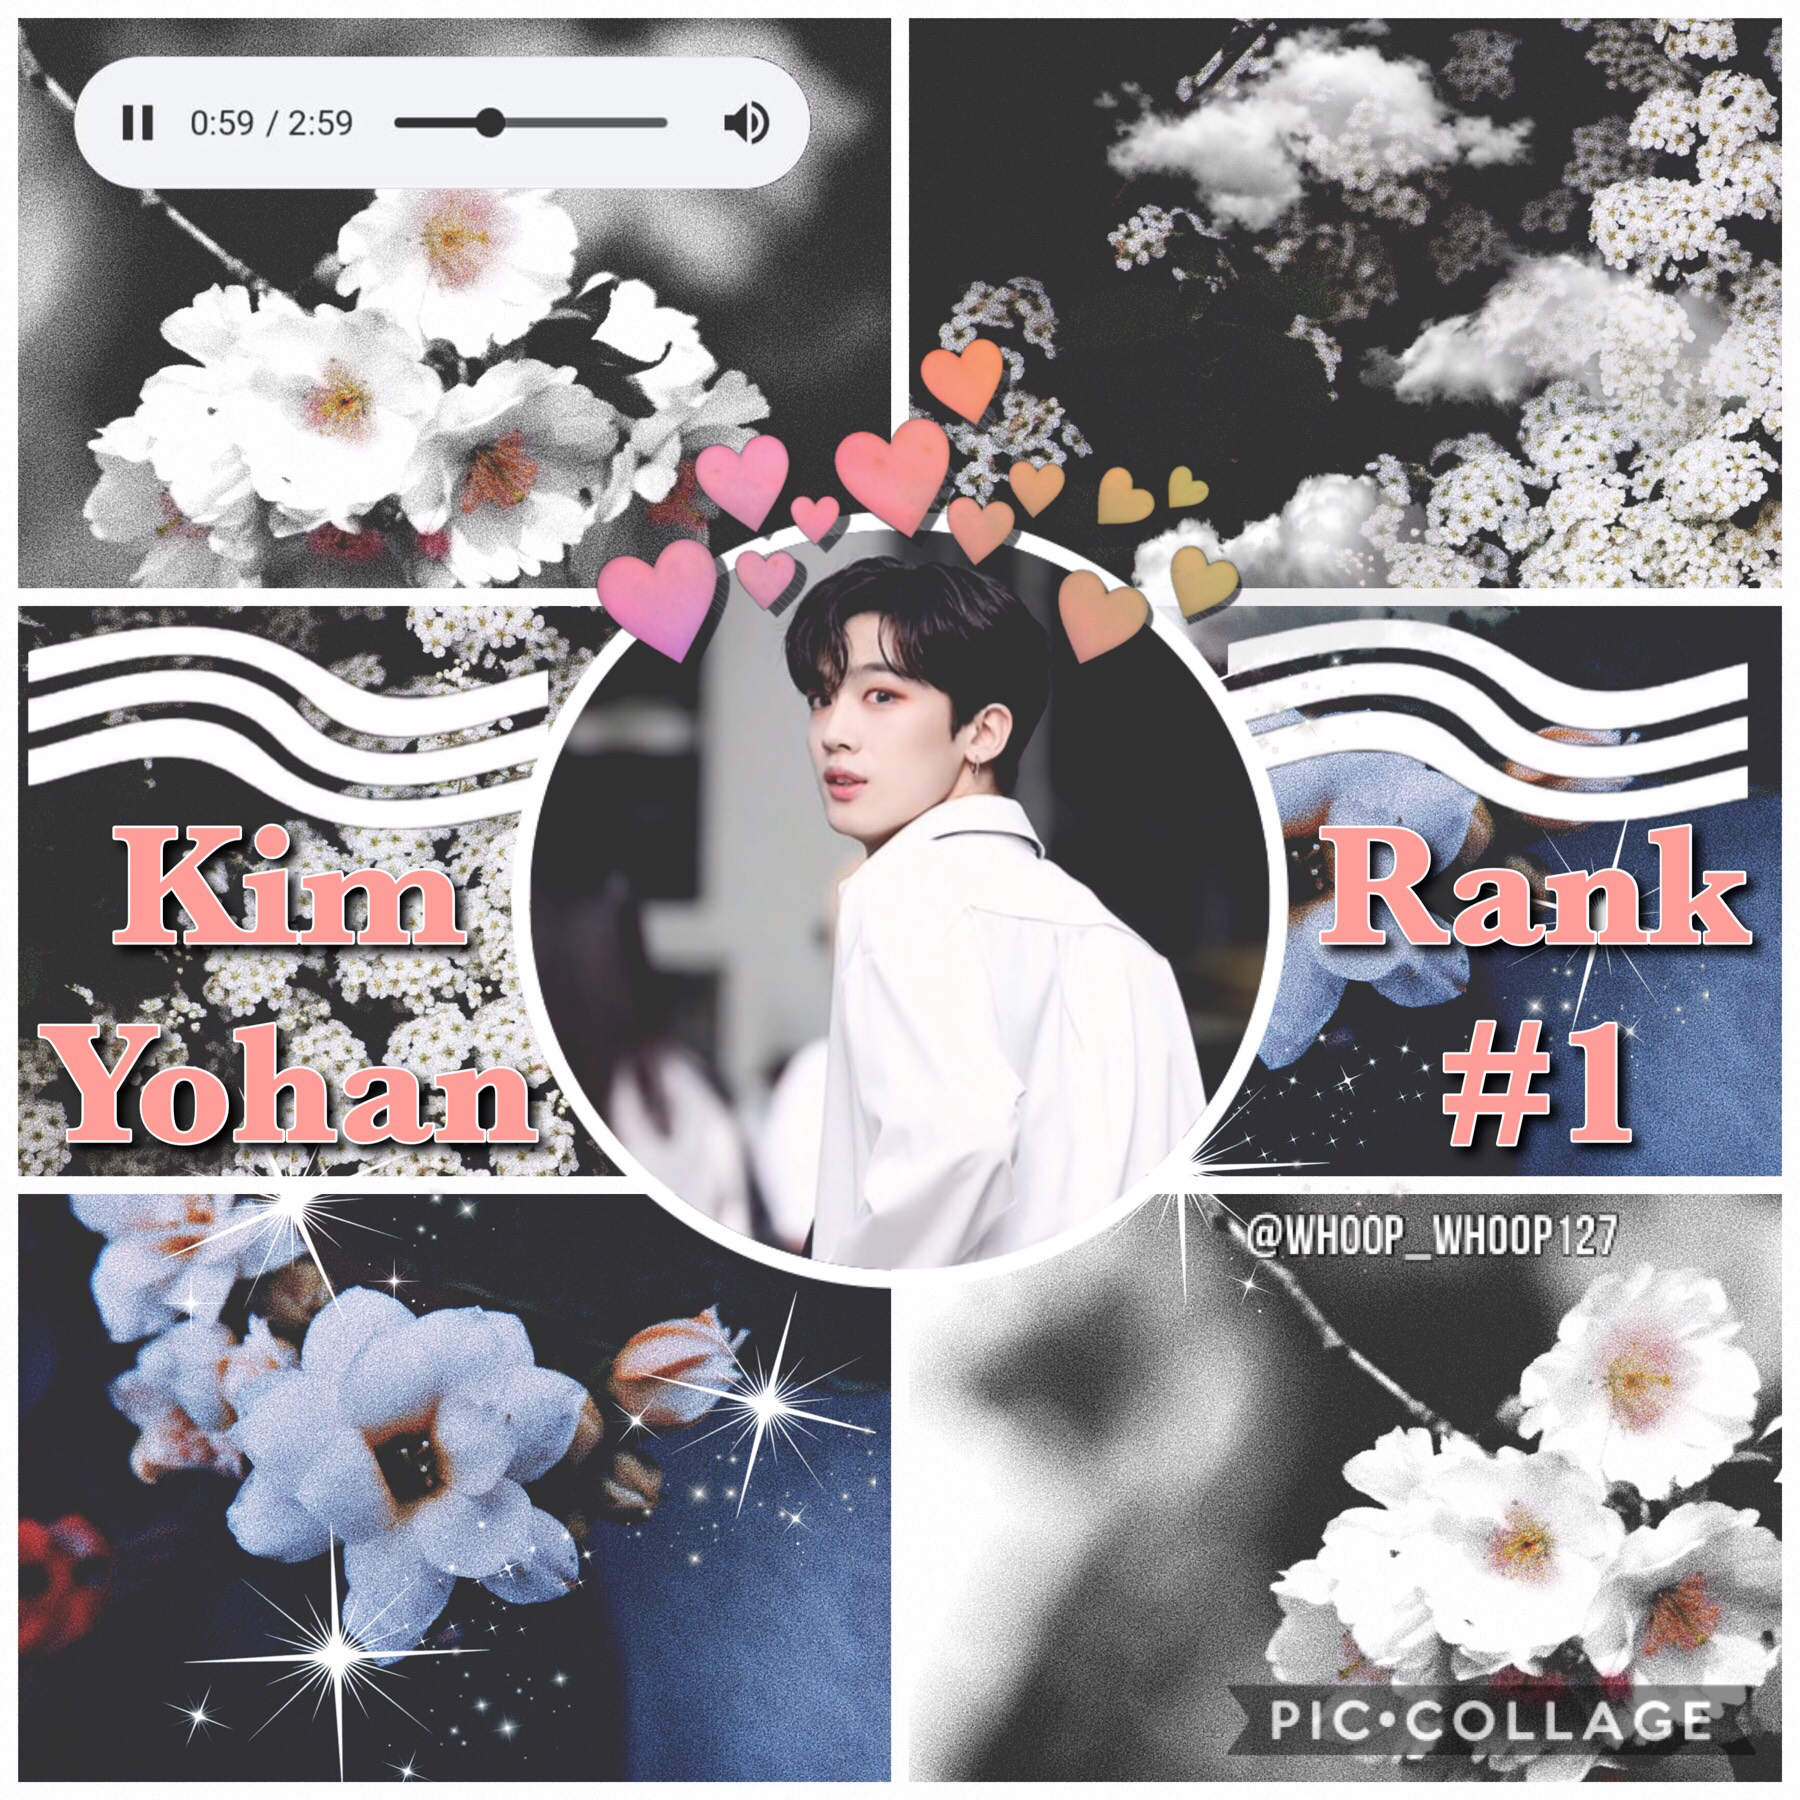 •🚒•
🍃Yohan~ X1🍃
I finished up my pre debut theme for X1! Guys so listen to Flash! Man I love X1😂 Any other stans (One Its) out there?? My bias is Yohan🙃